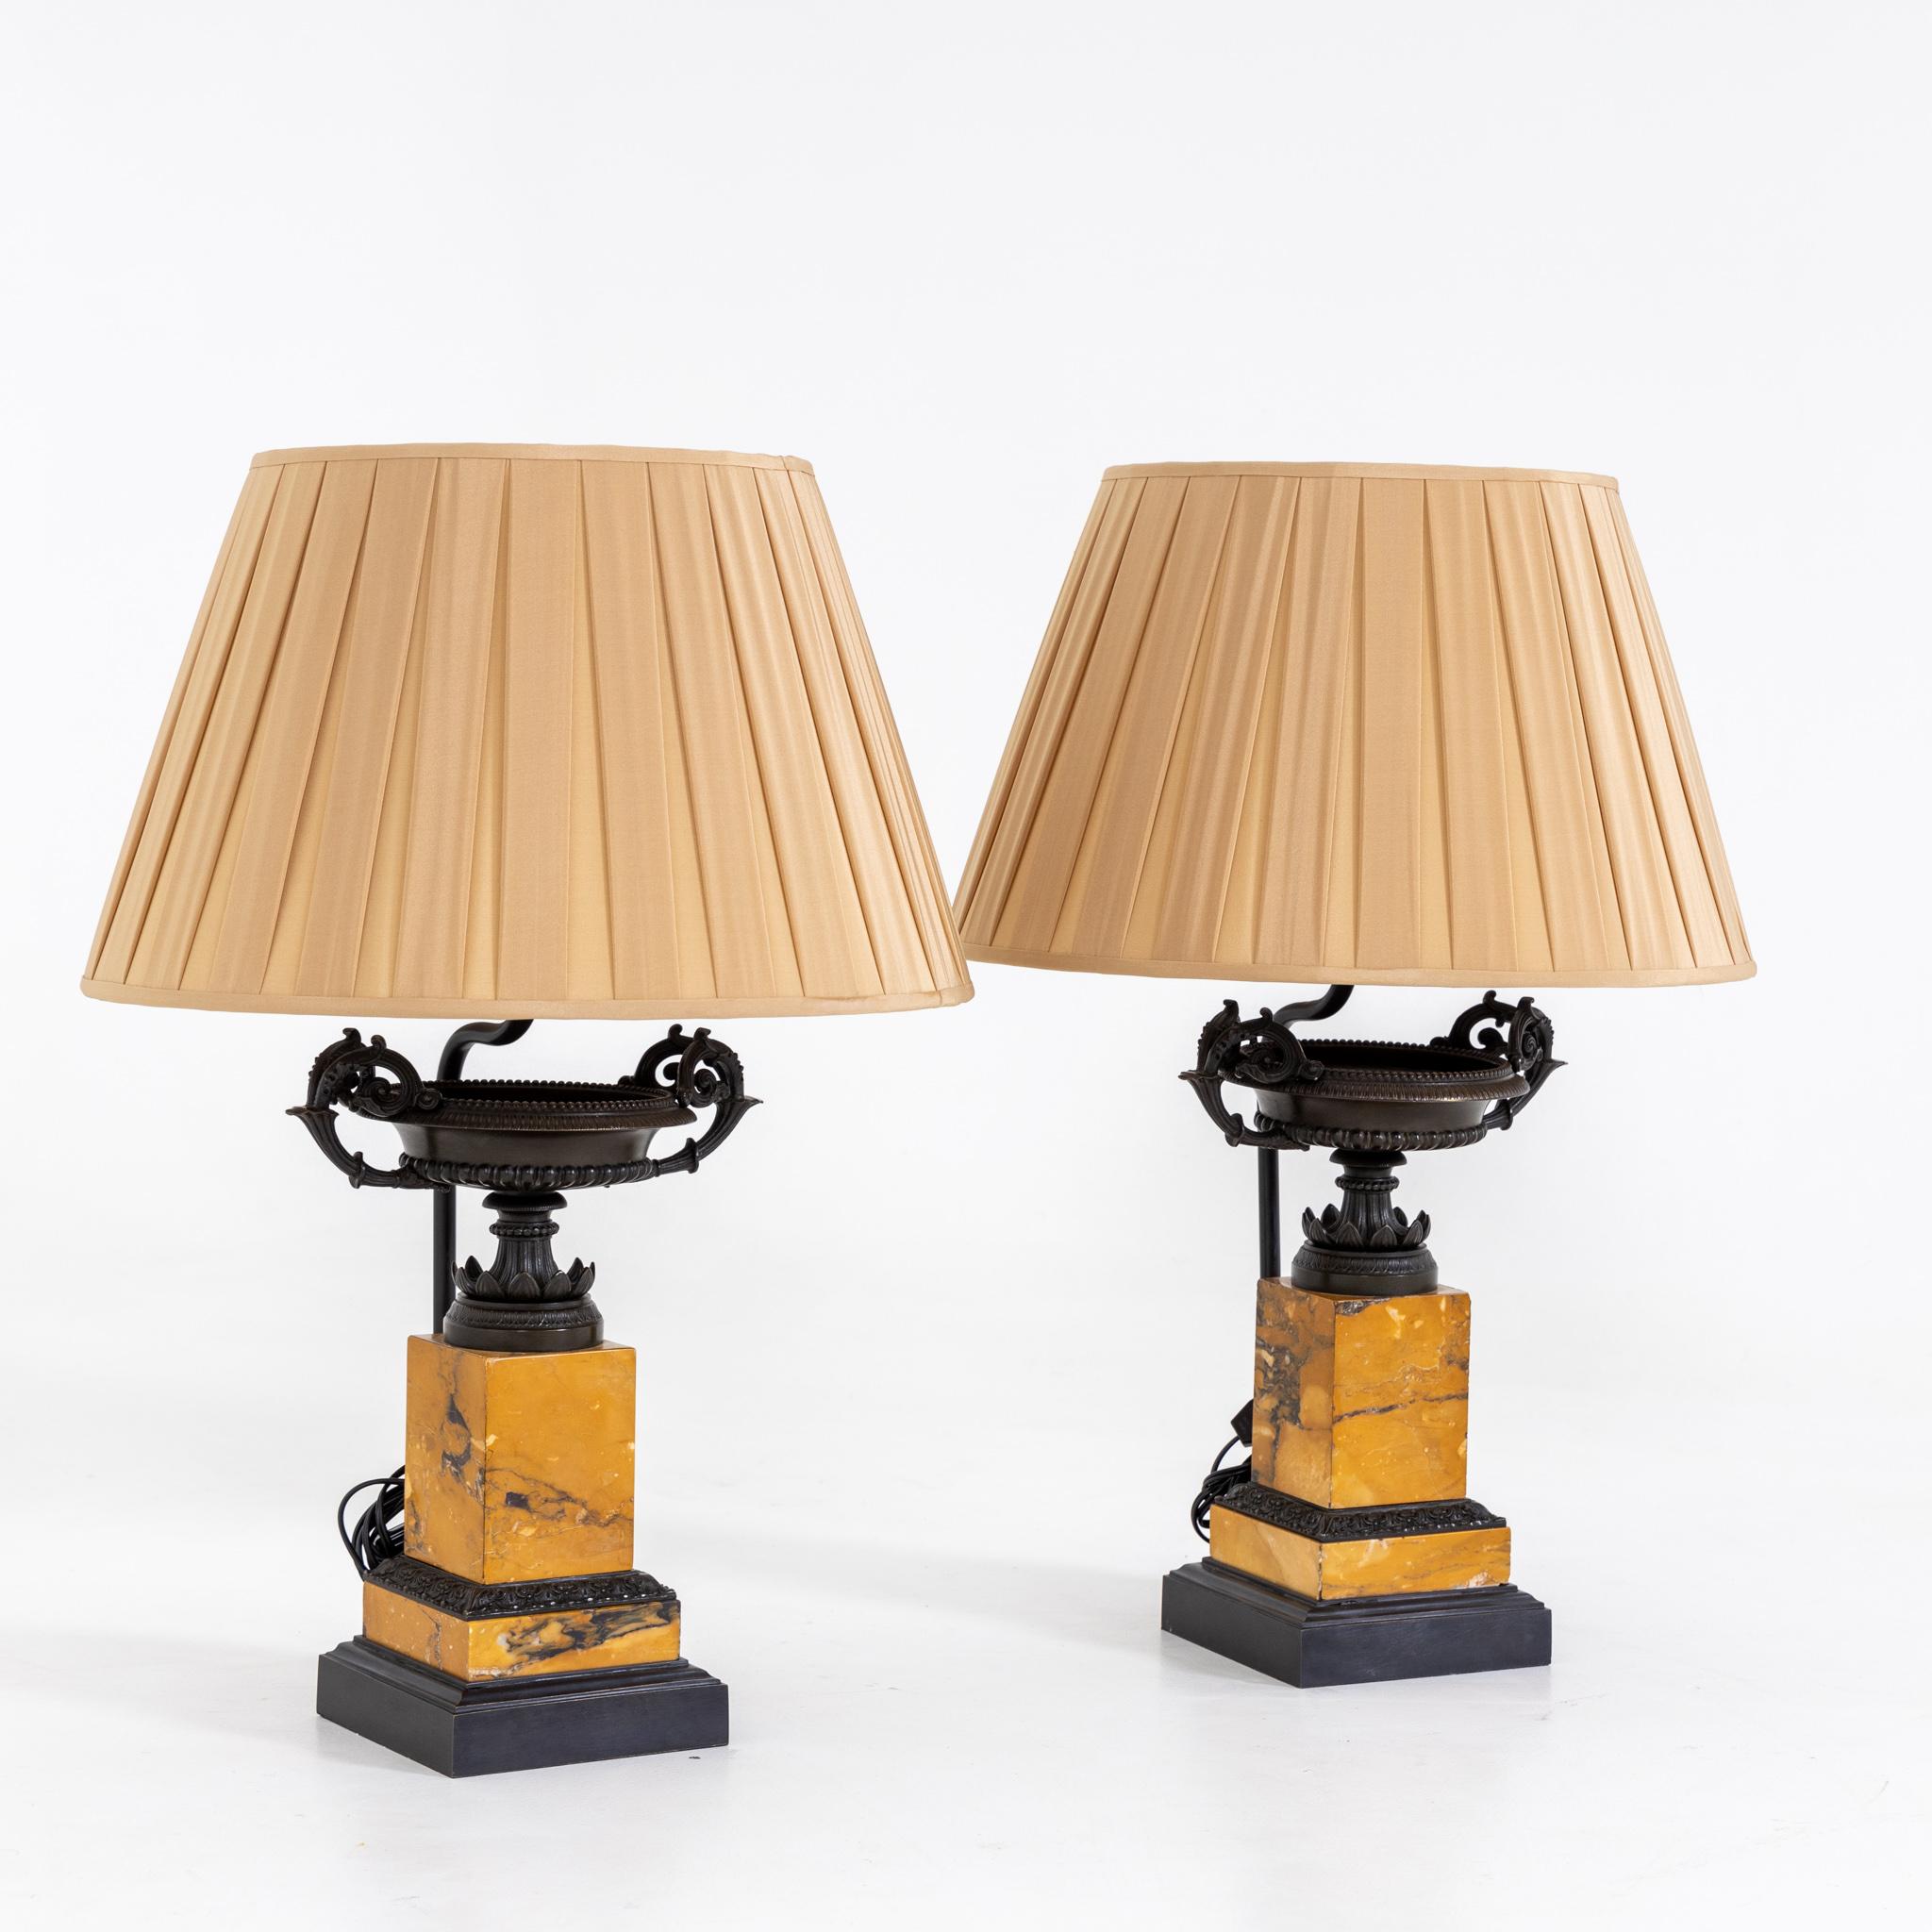 Pair of lamps with tazza over square pedestals of yellow marble and black plinths.